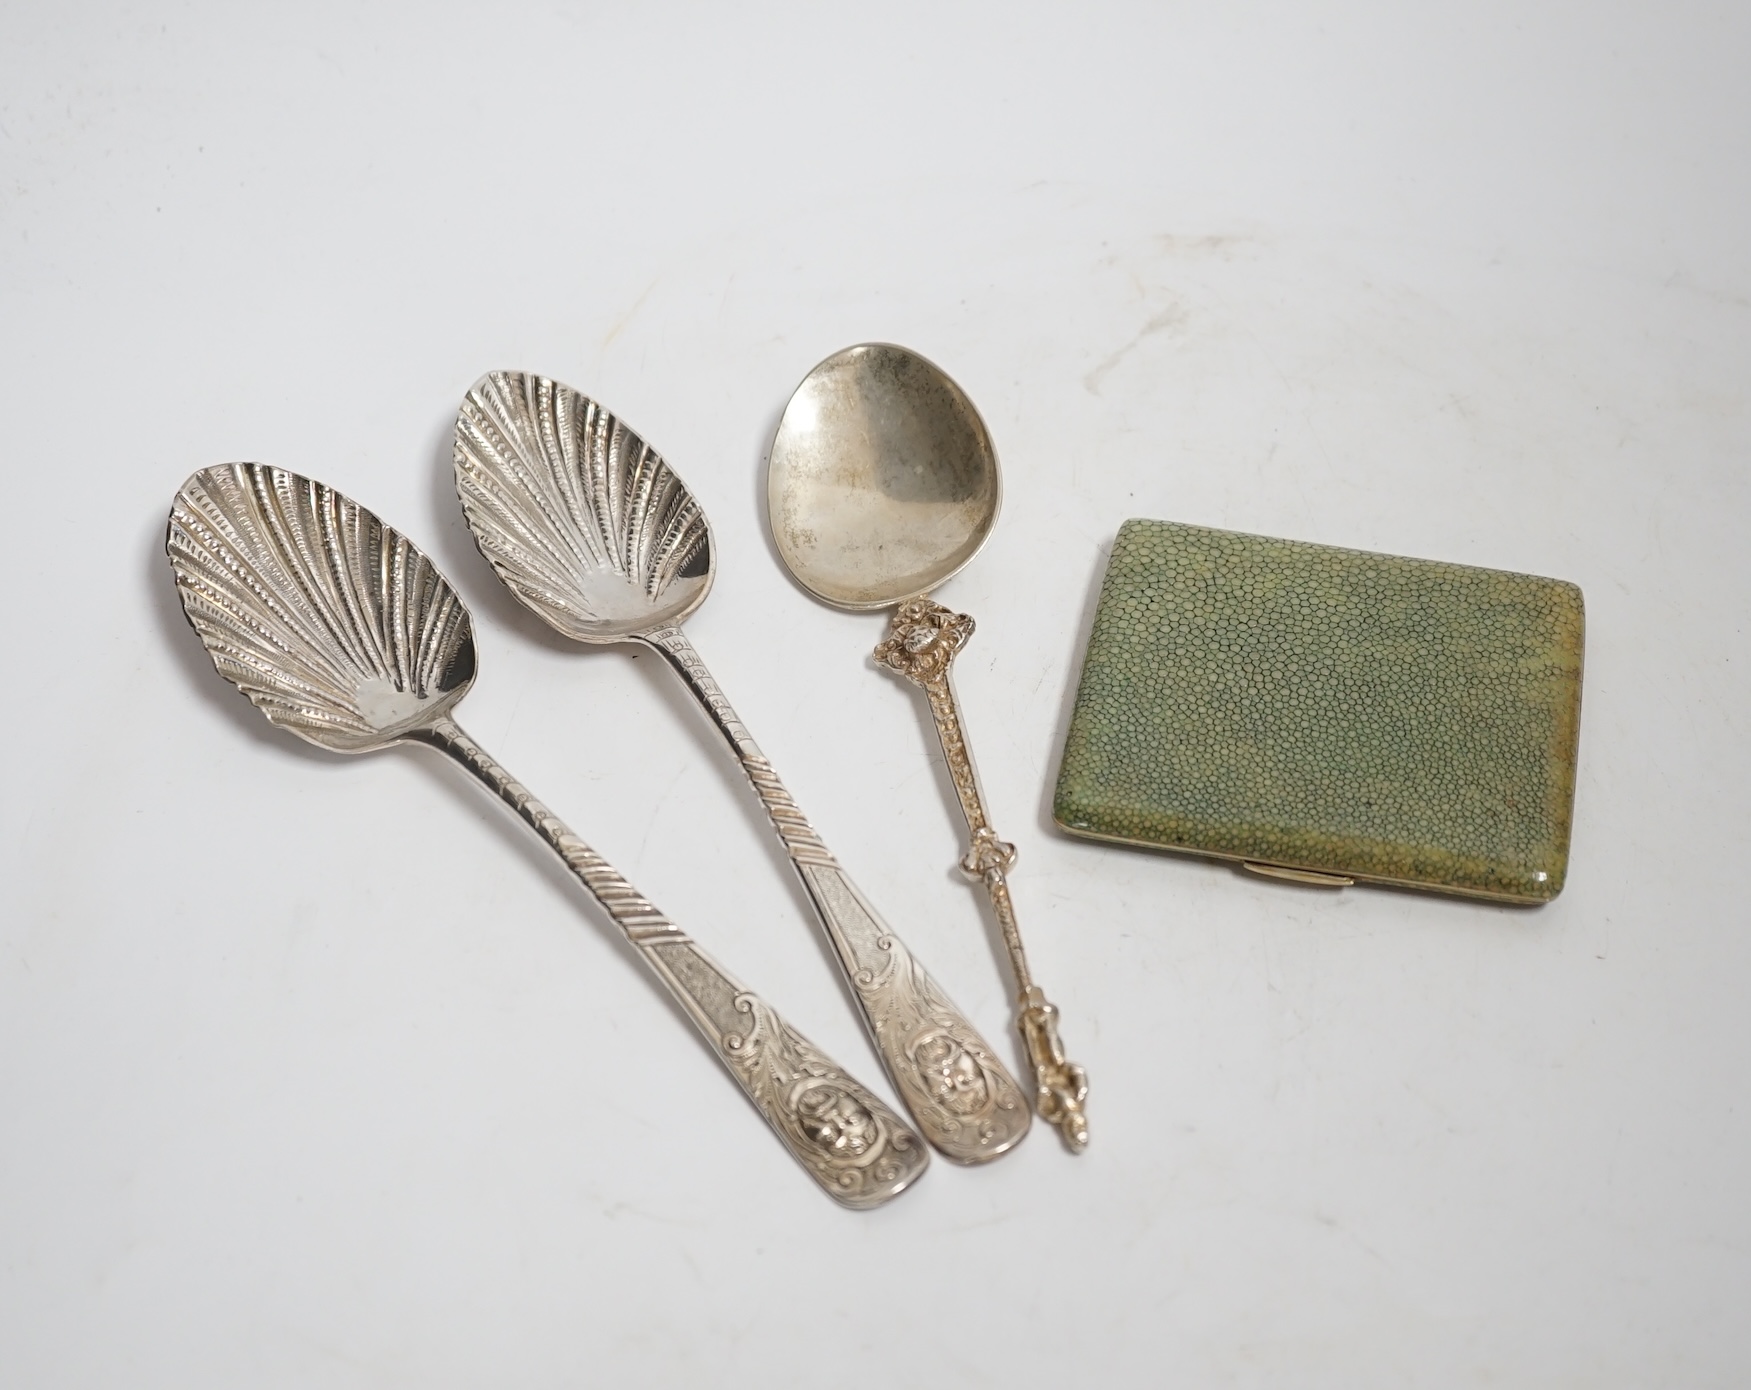 A George III Scottish provincial table spoon, with later decoration, Robert Keay I, Perth, circa 1790, 22.5cm, together with a George III silver table spoon with similar decoration, a continental white metal spoon and a